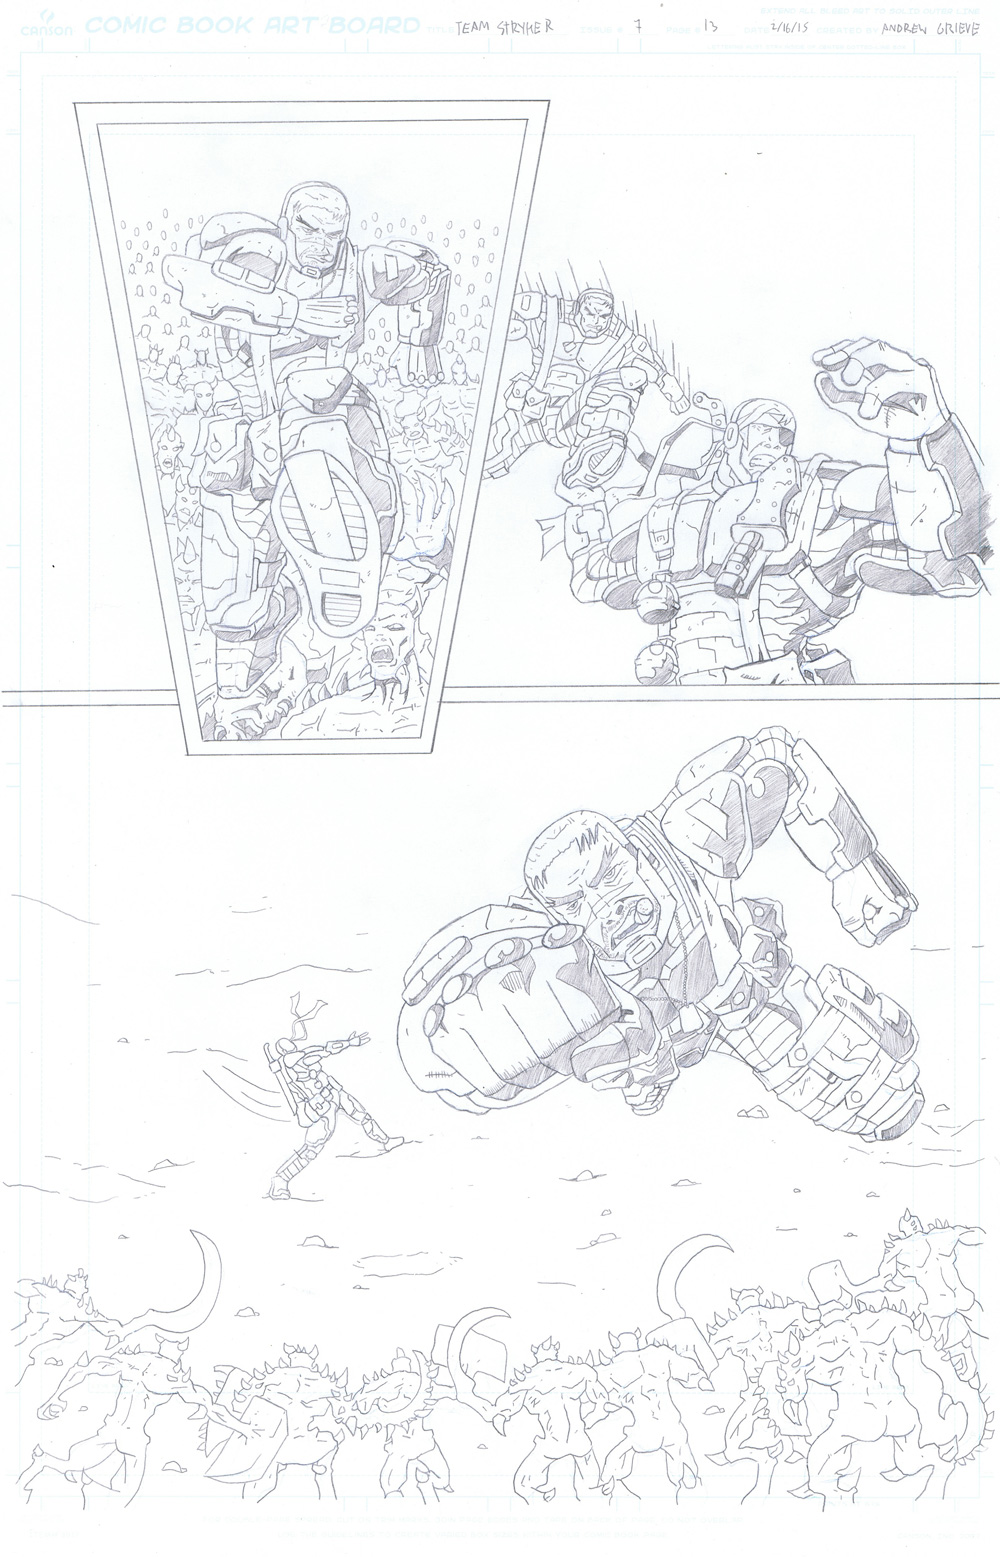 MISSION 007: PAGE 13 PENCIL